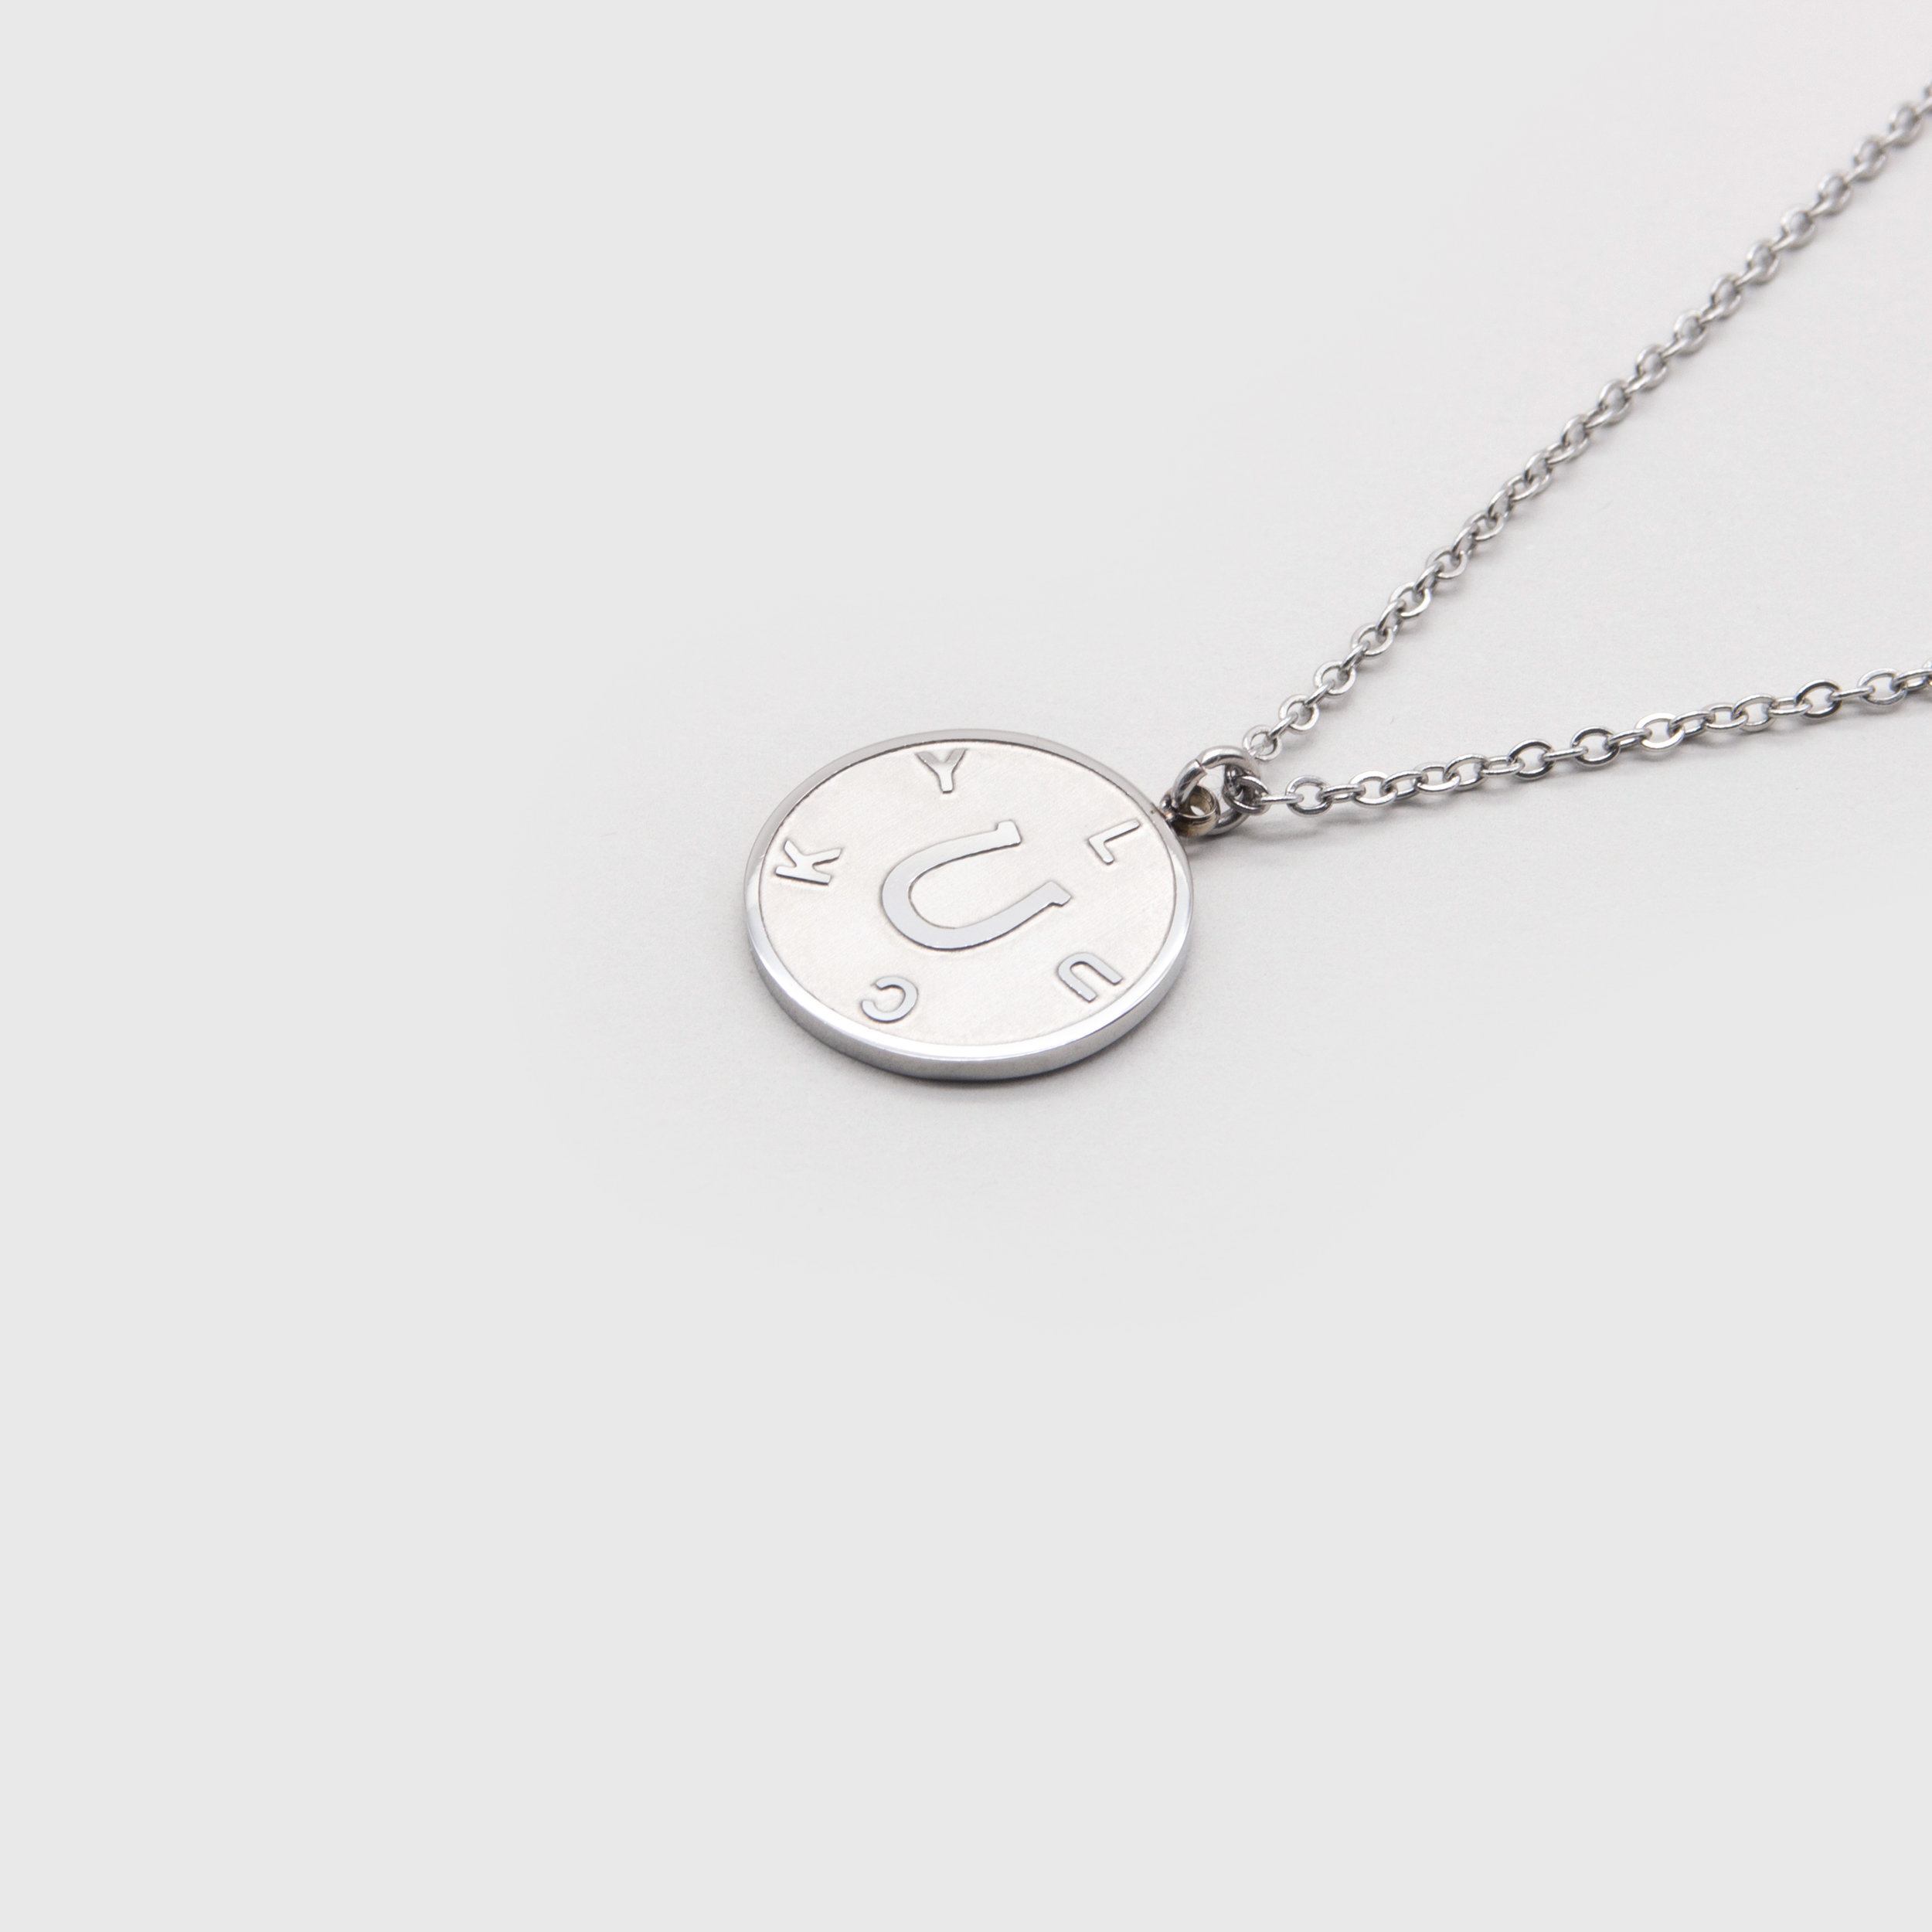 Kuku lucky silver coin necklace with horseshoe